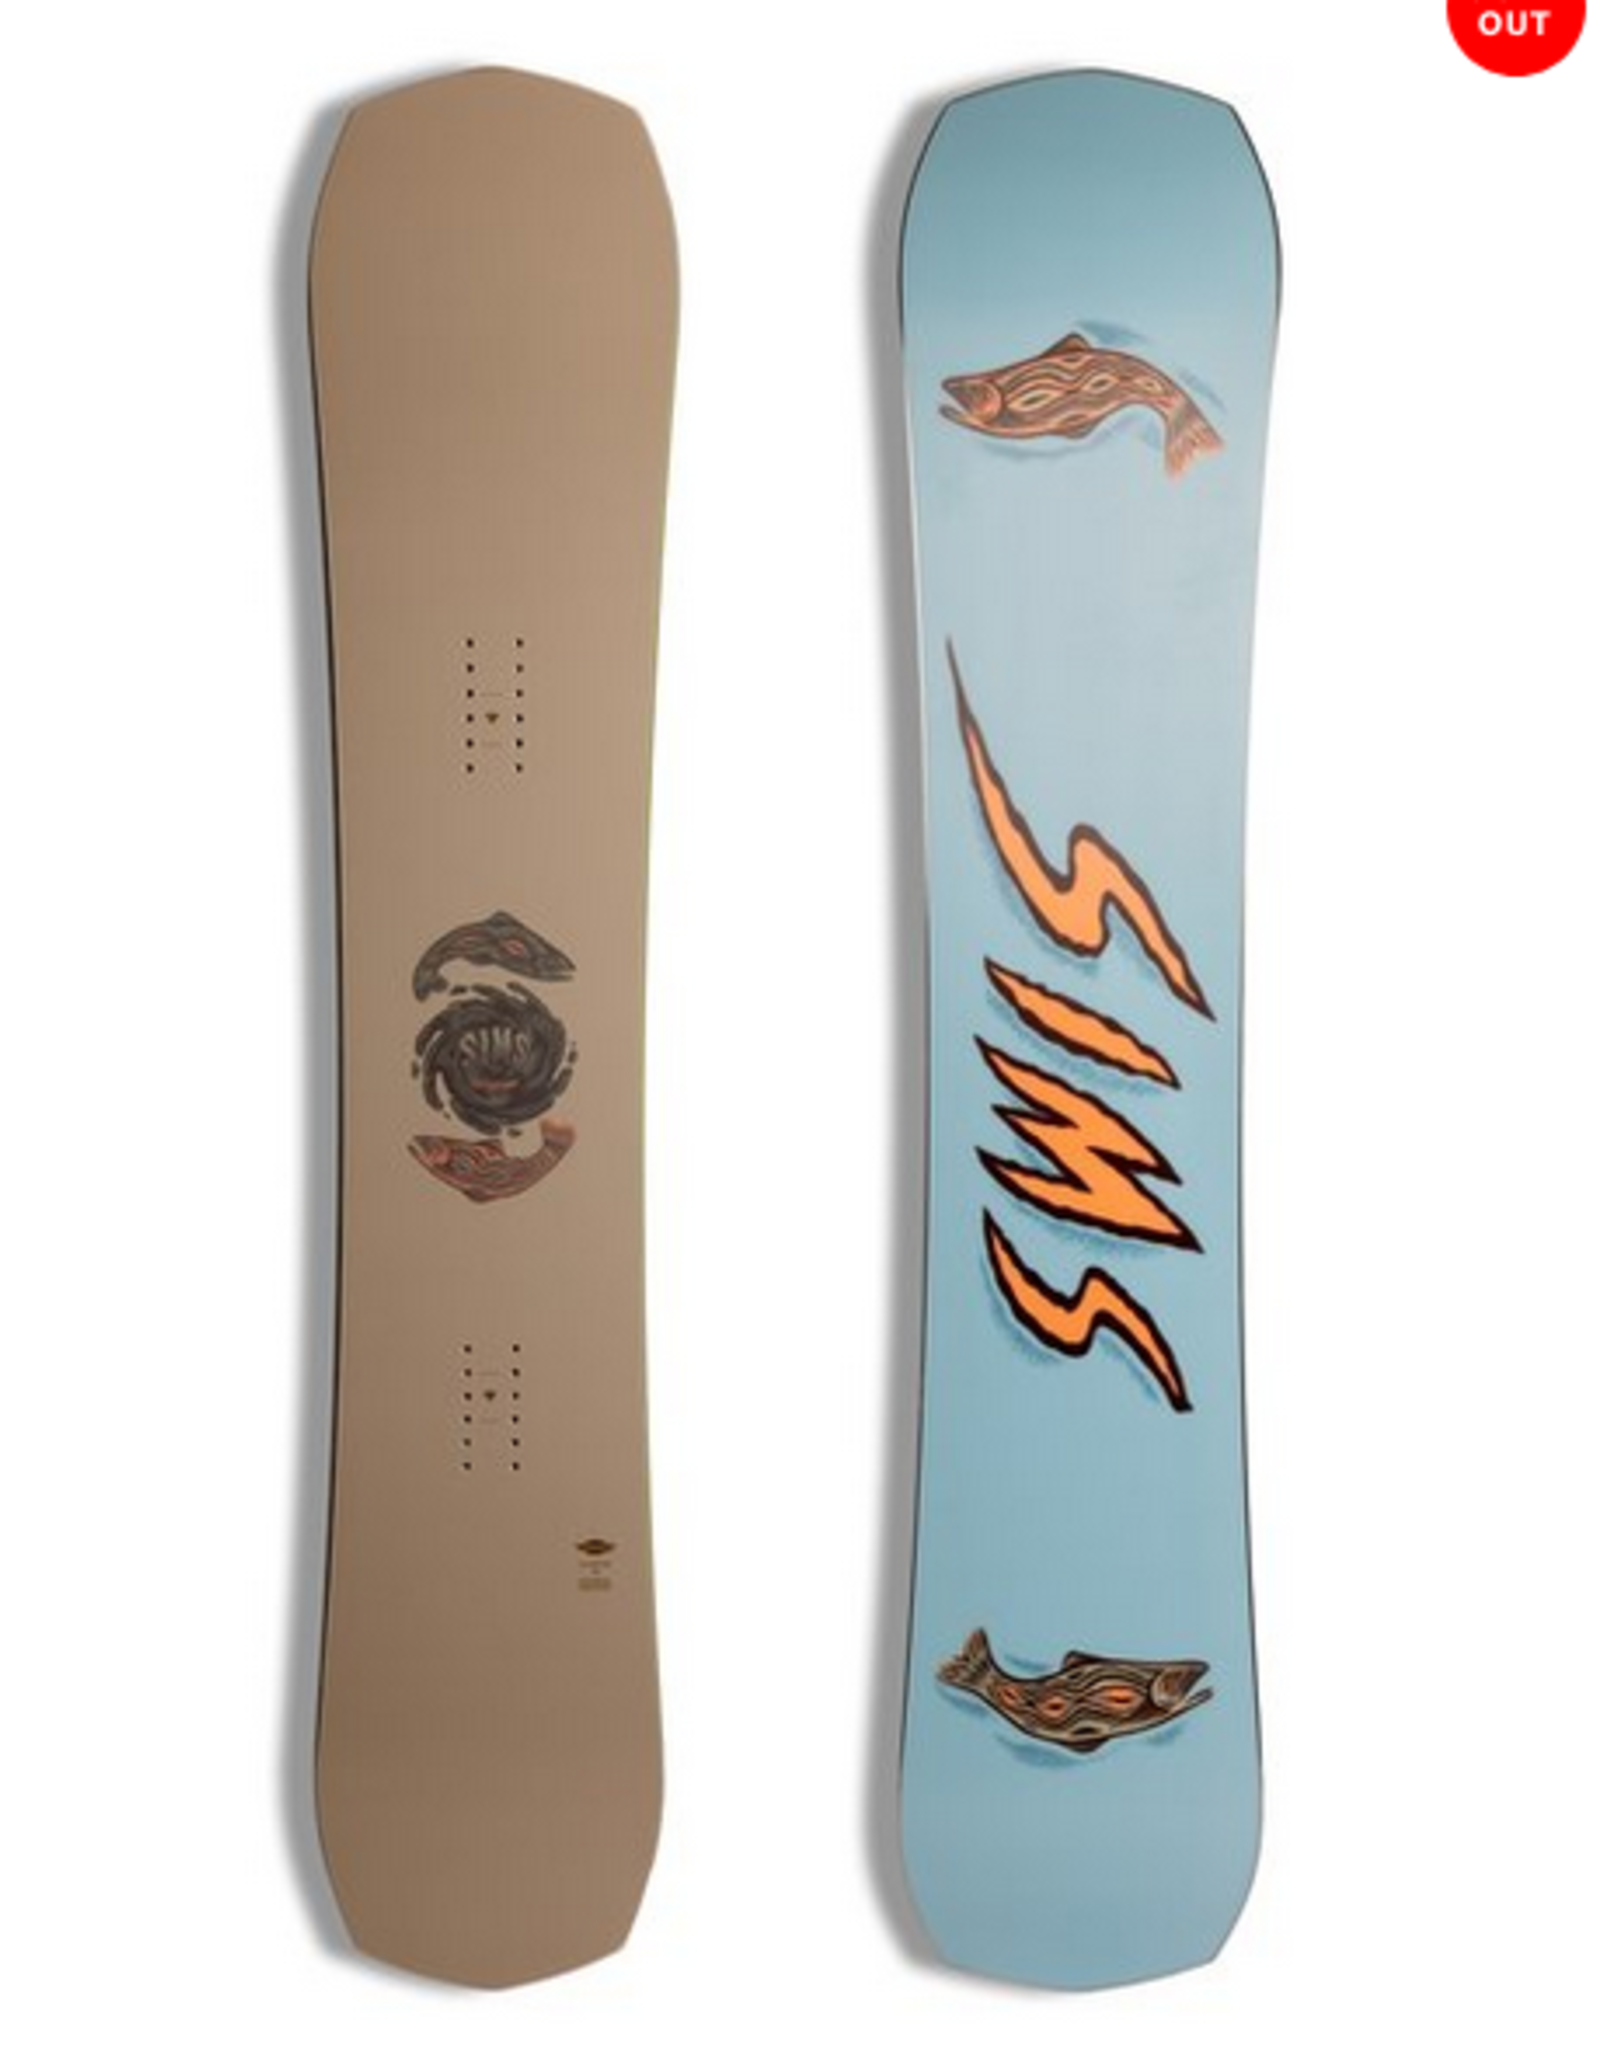 SIMS SIMS 2023 DISTORTION SNOWBOARD